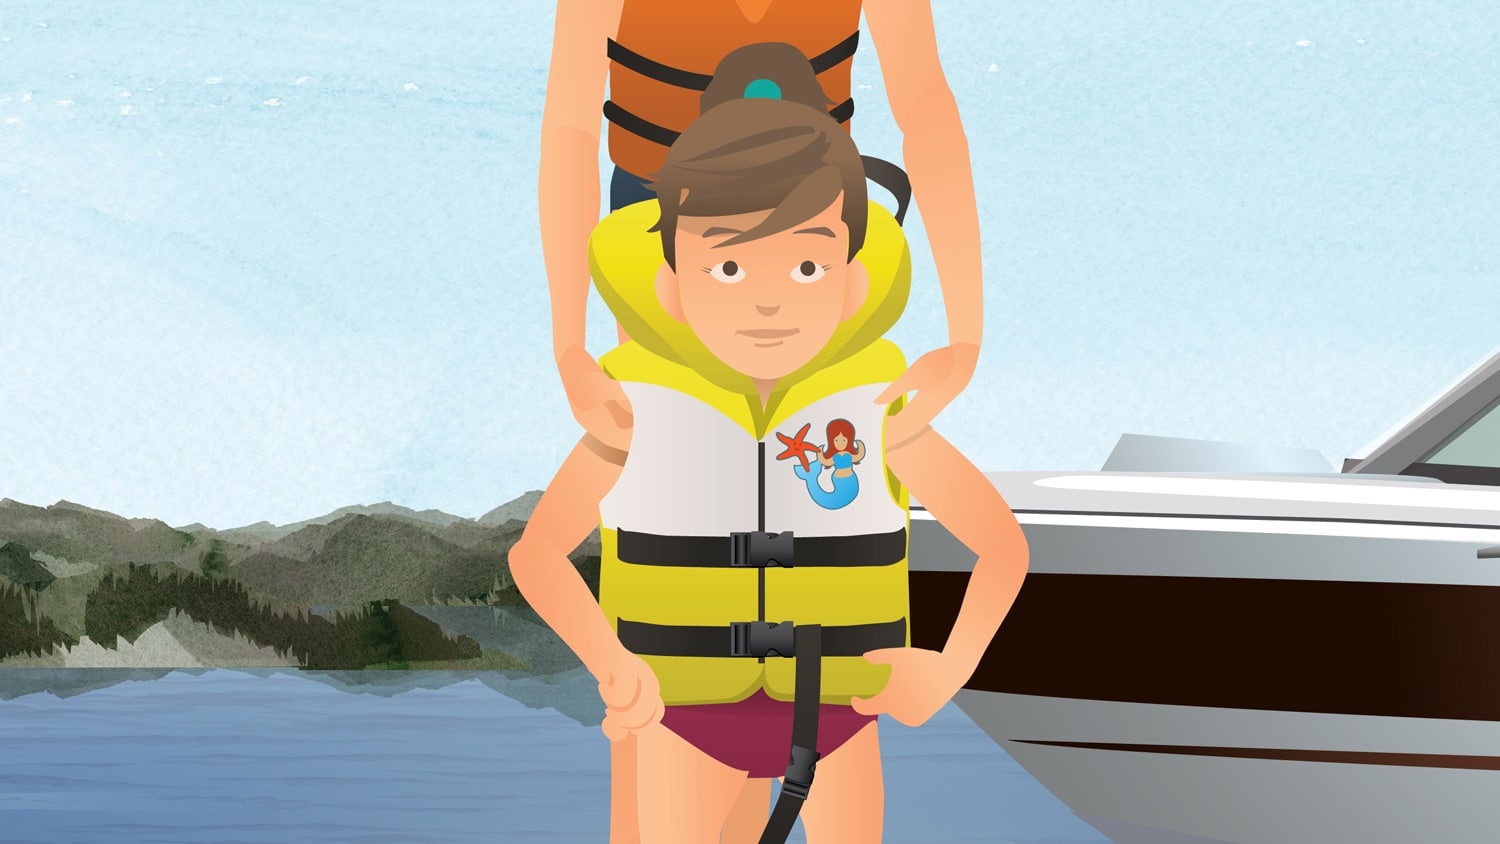 Life Jackets: Sizing, Testing and Requirements for Children